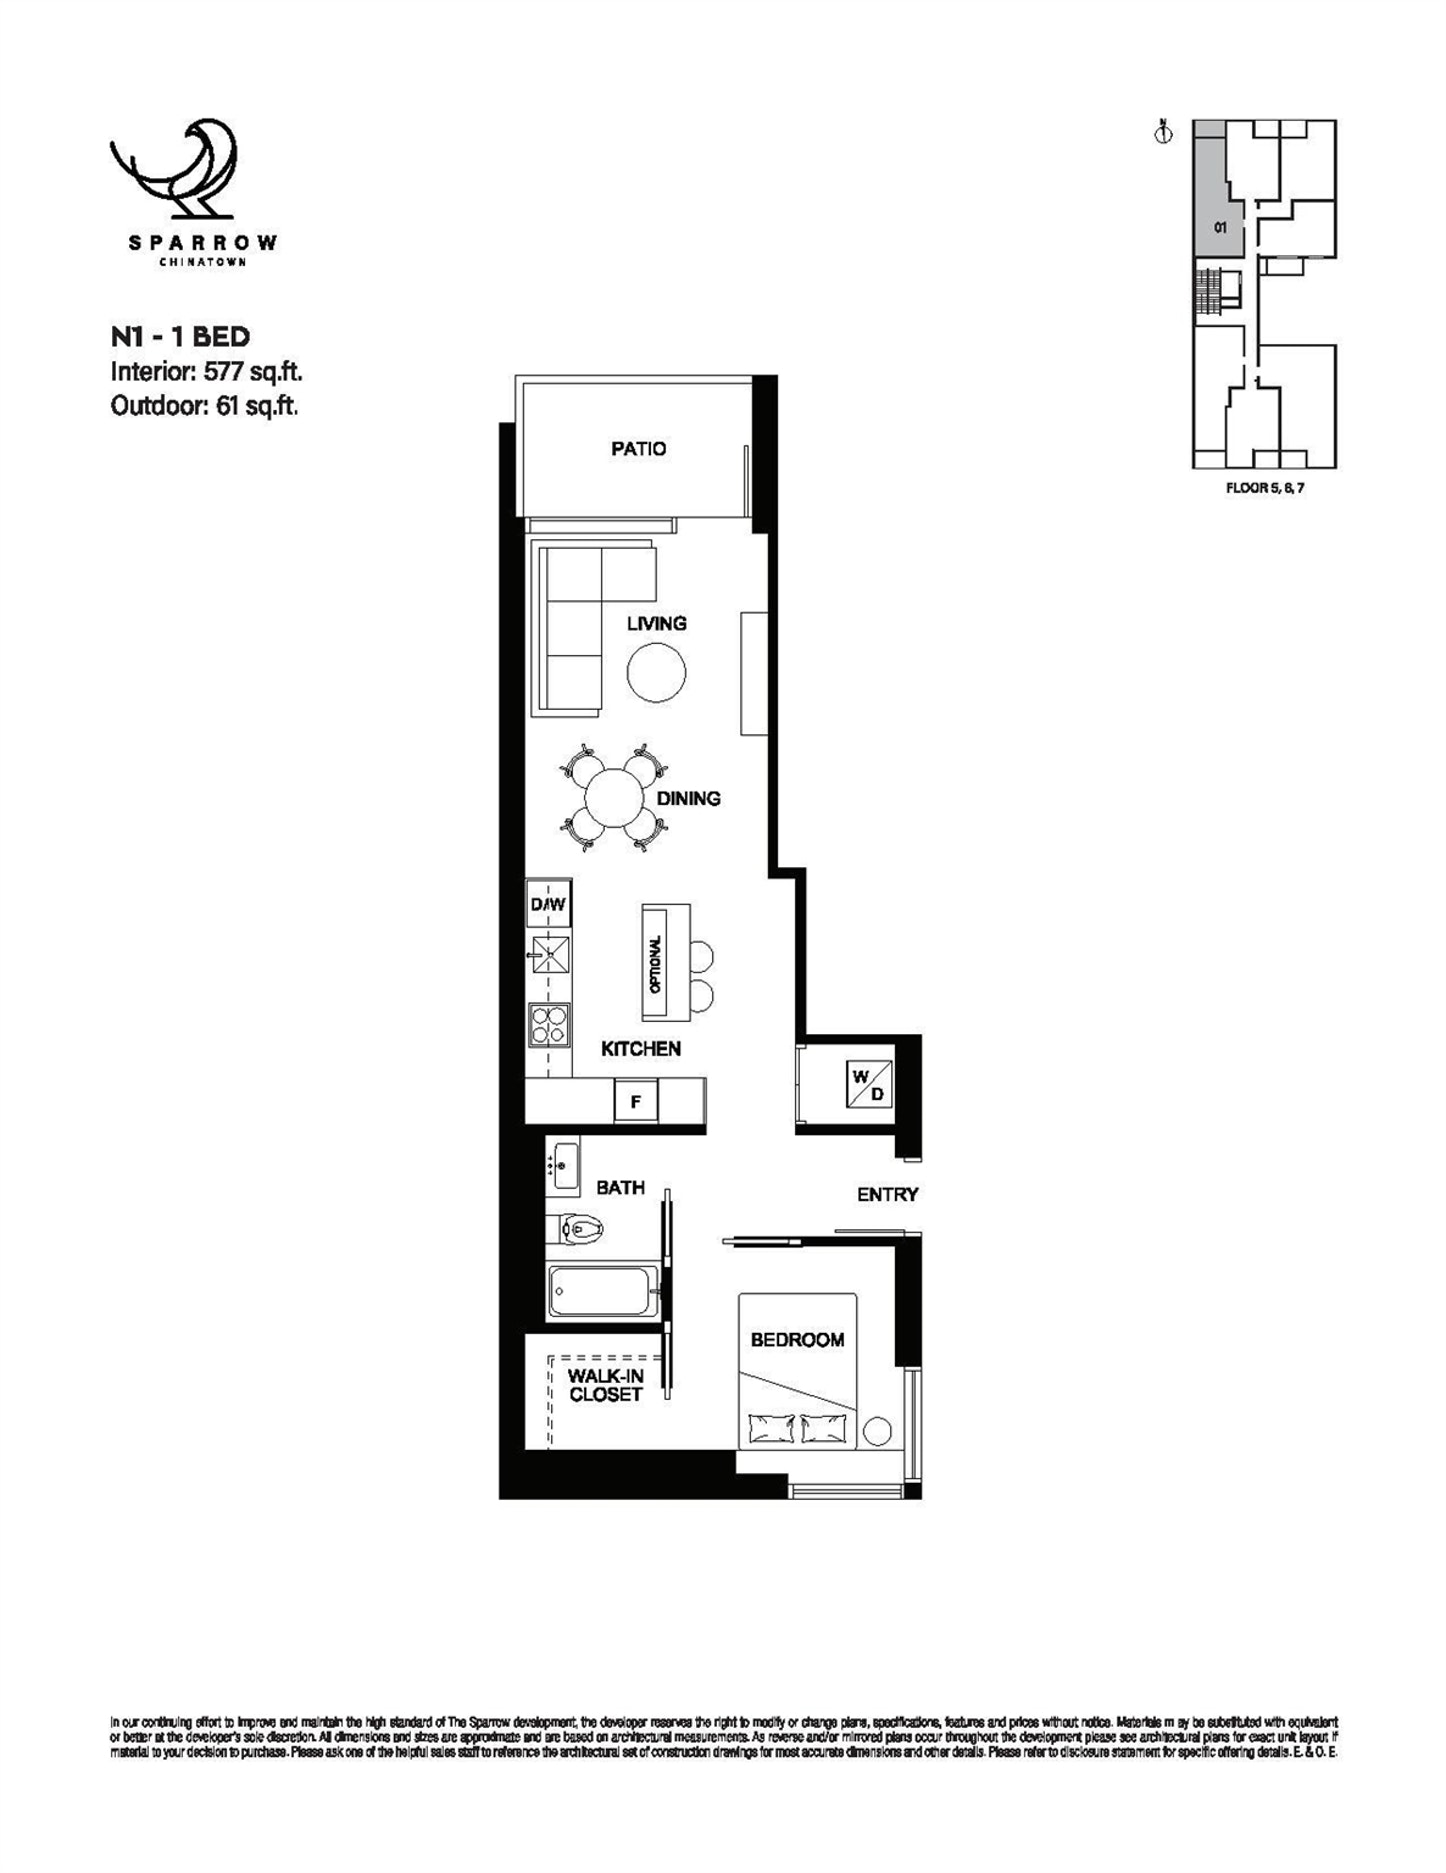 501 Floor Plan of Sparrow Condos with undefined beds